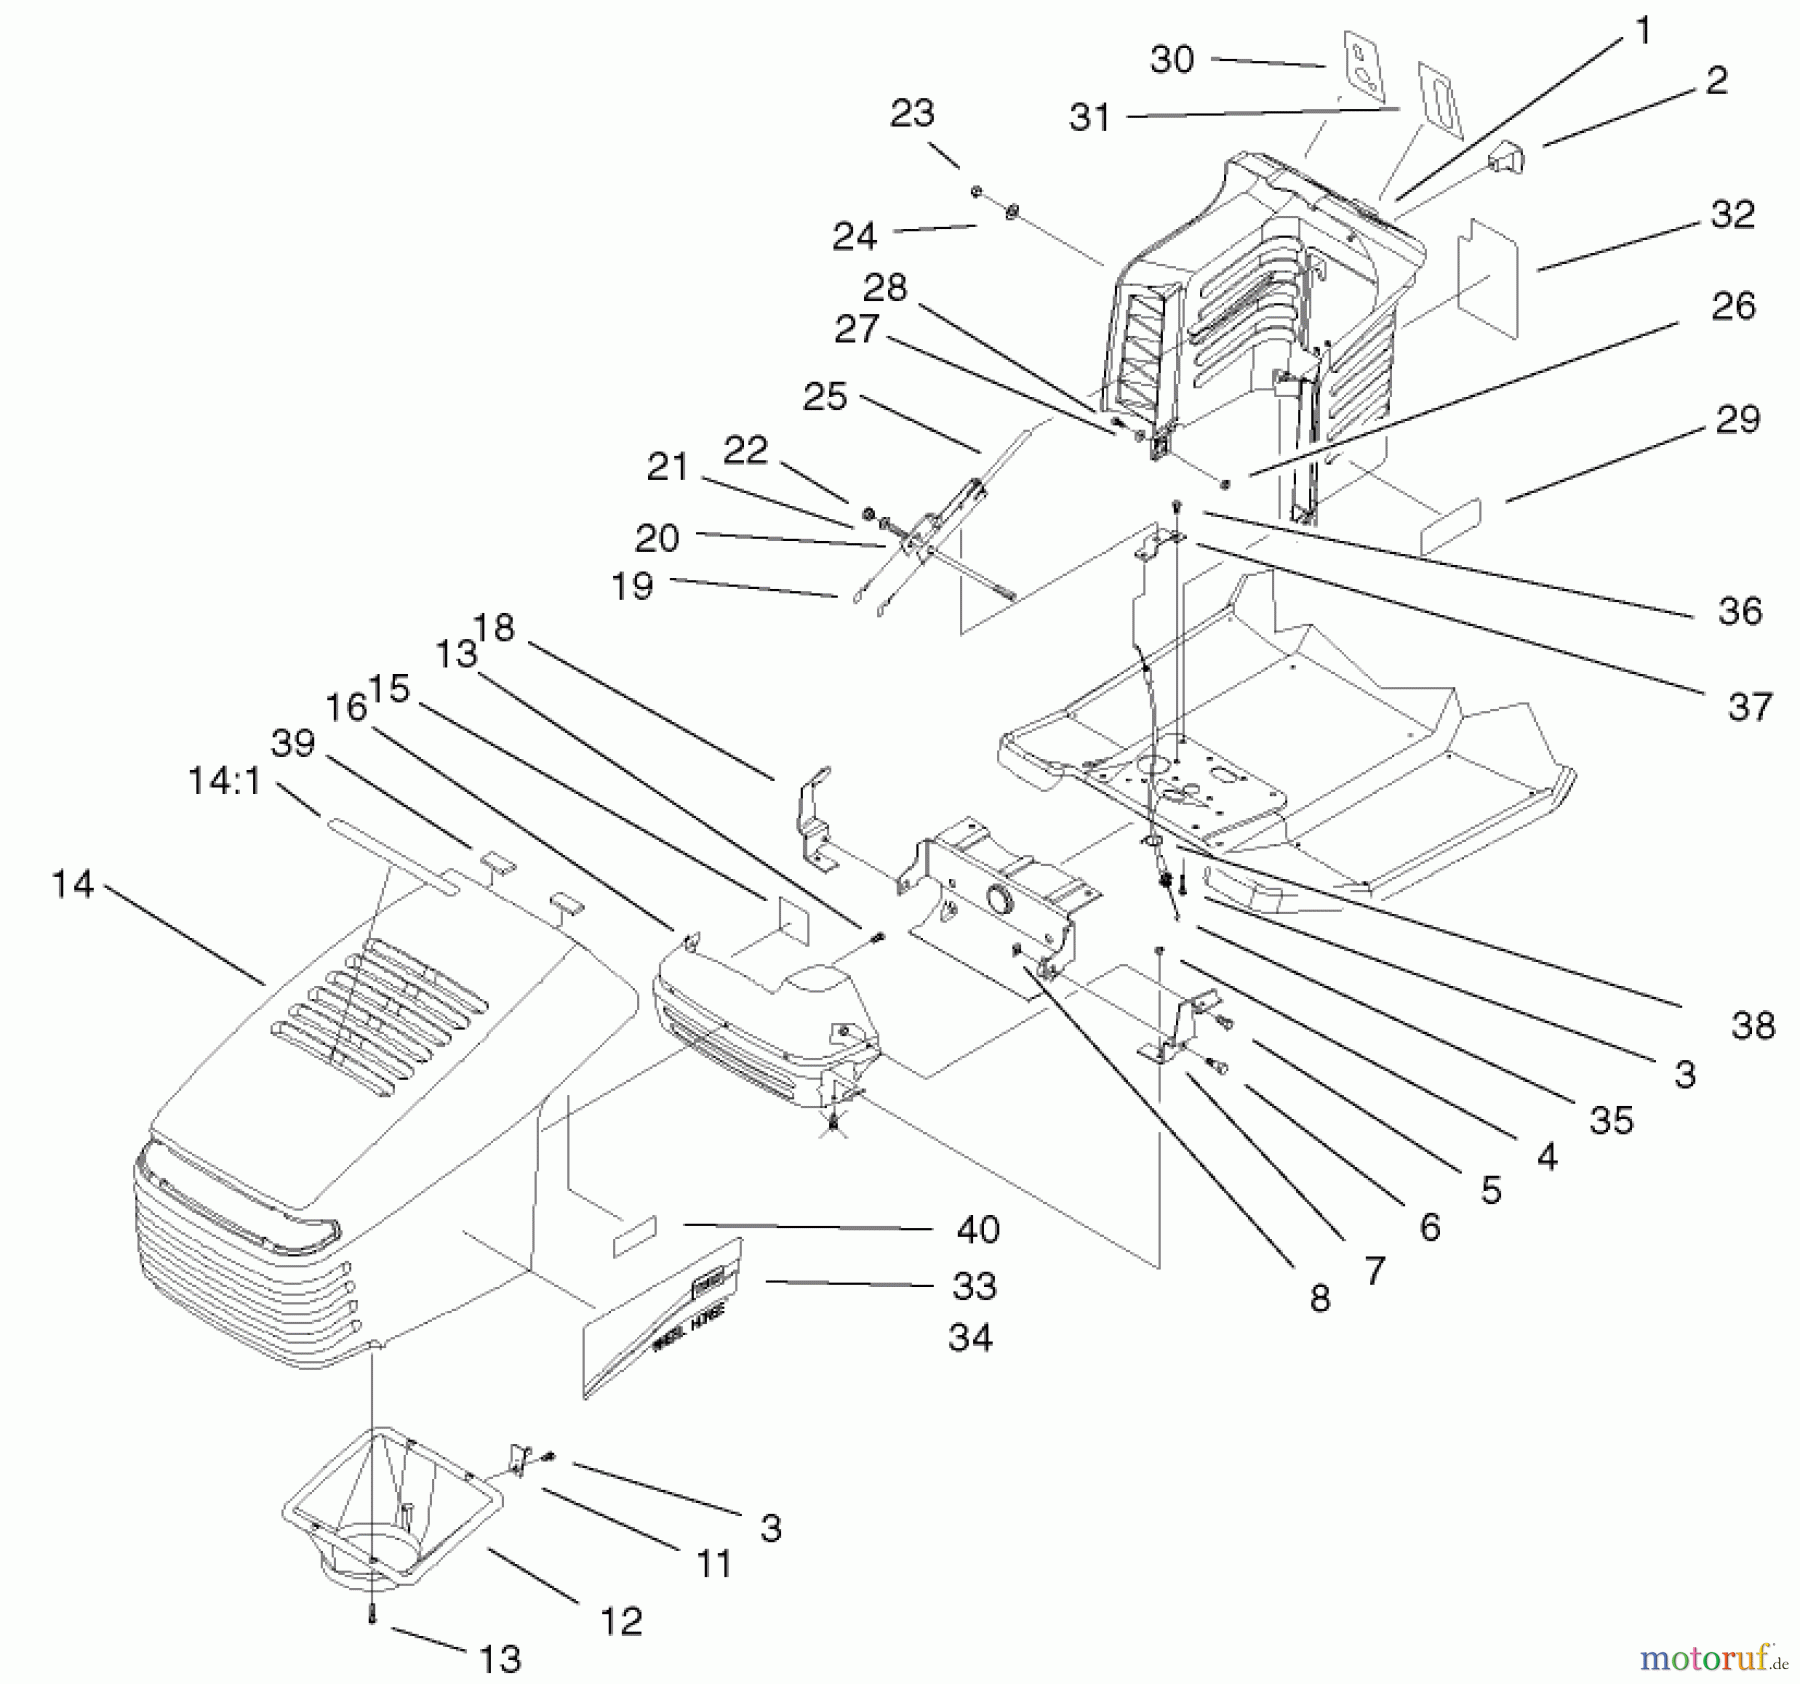  Toro Neu Mowers, Lawn & Garden Tractor Seite 1 71228 (17-44HXL) - Toro 17-44HXL Lawn Tractor, 2002 (220000001-220010000) HOOD AND TOWER ASSEMBLY